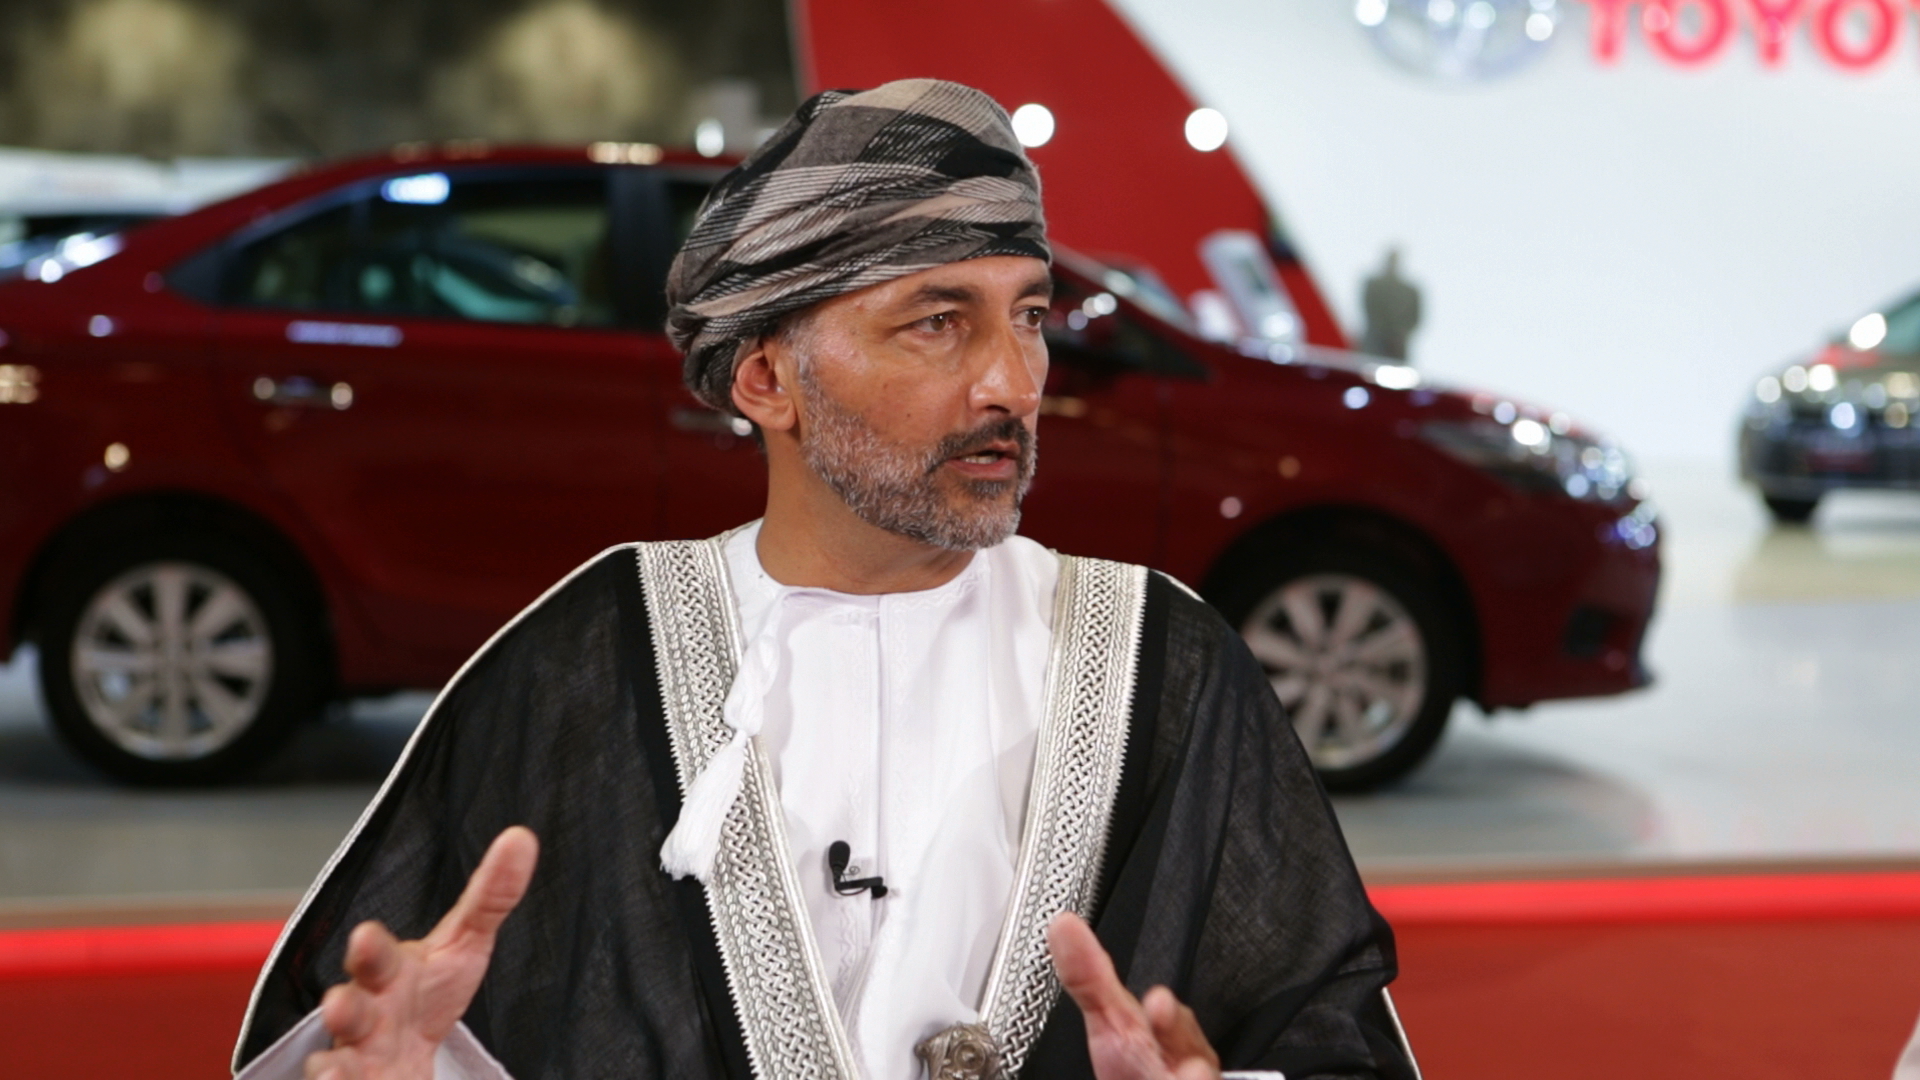 Oman traffic: Awareness ultimate solution to traffic safety question, says Sayyid Tarik